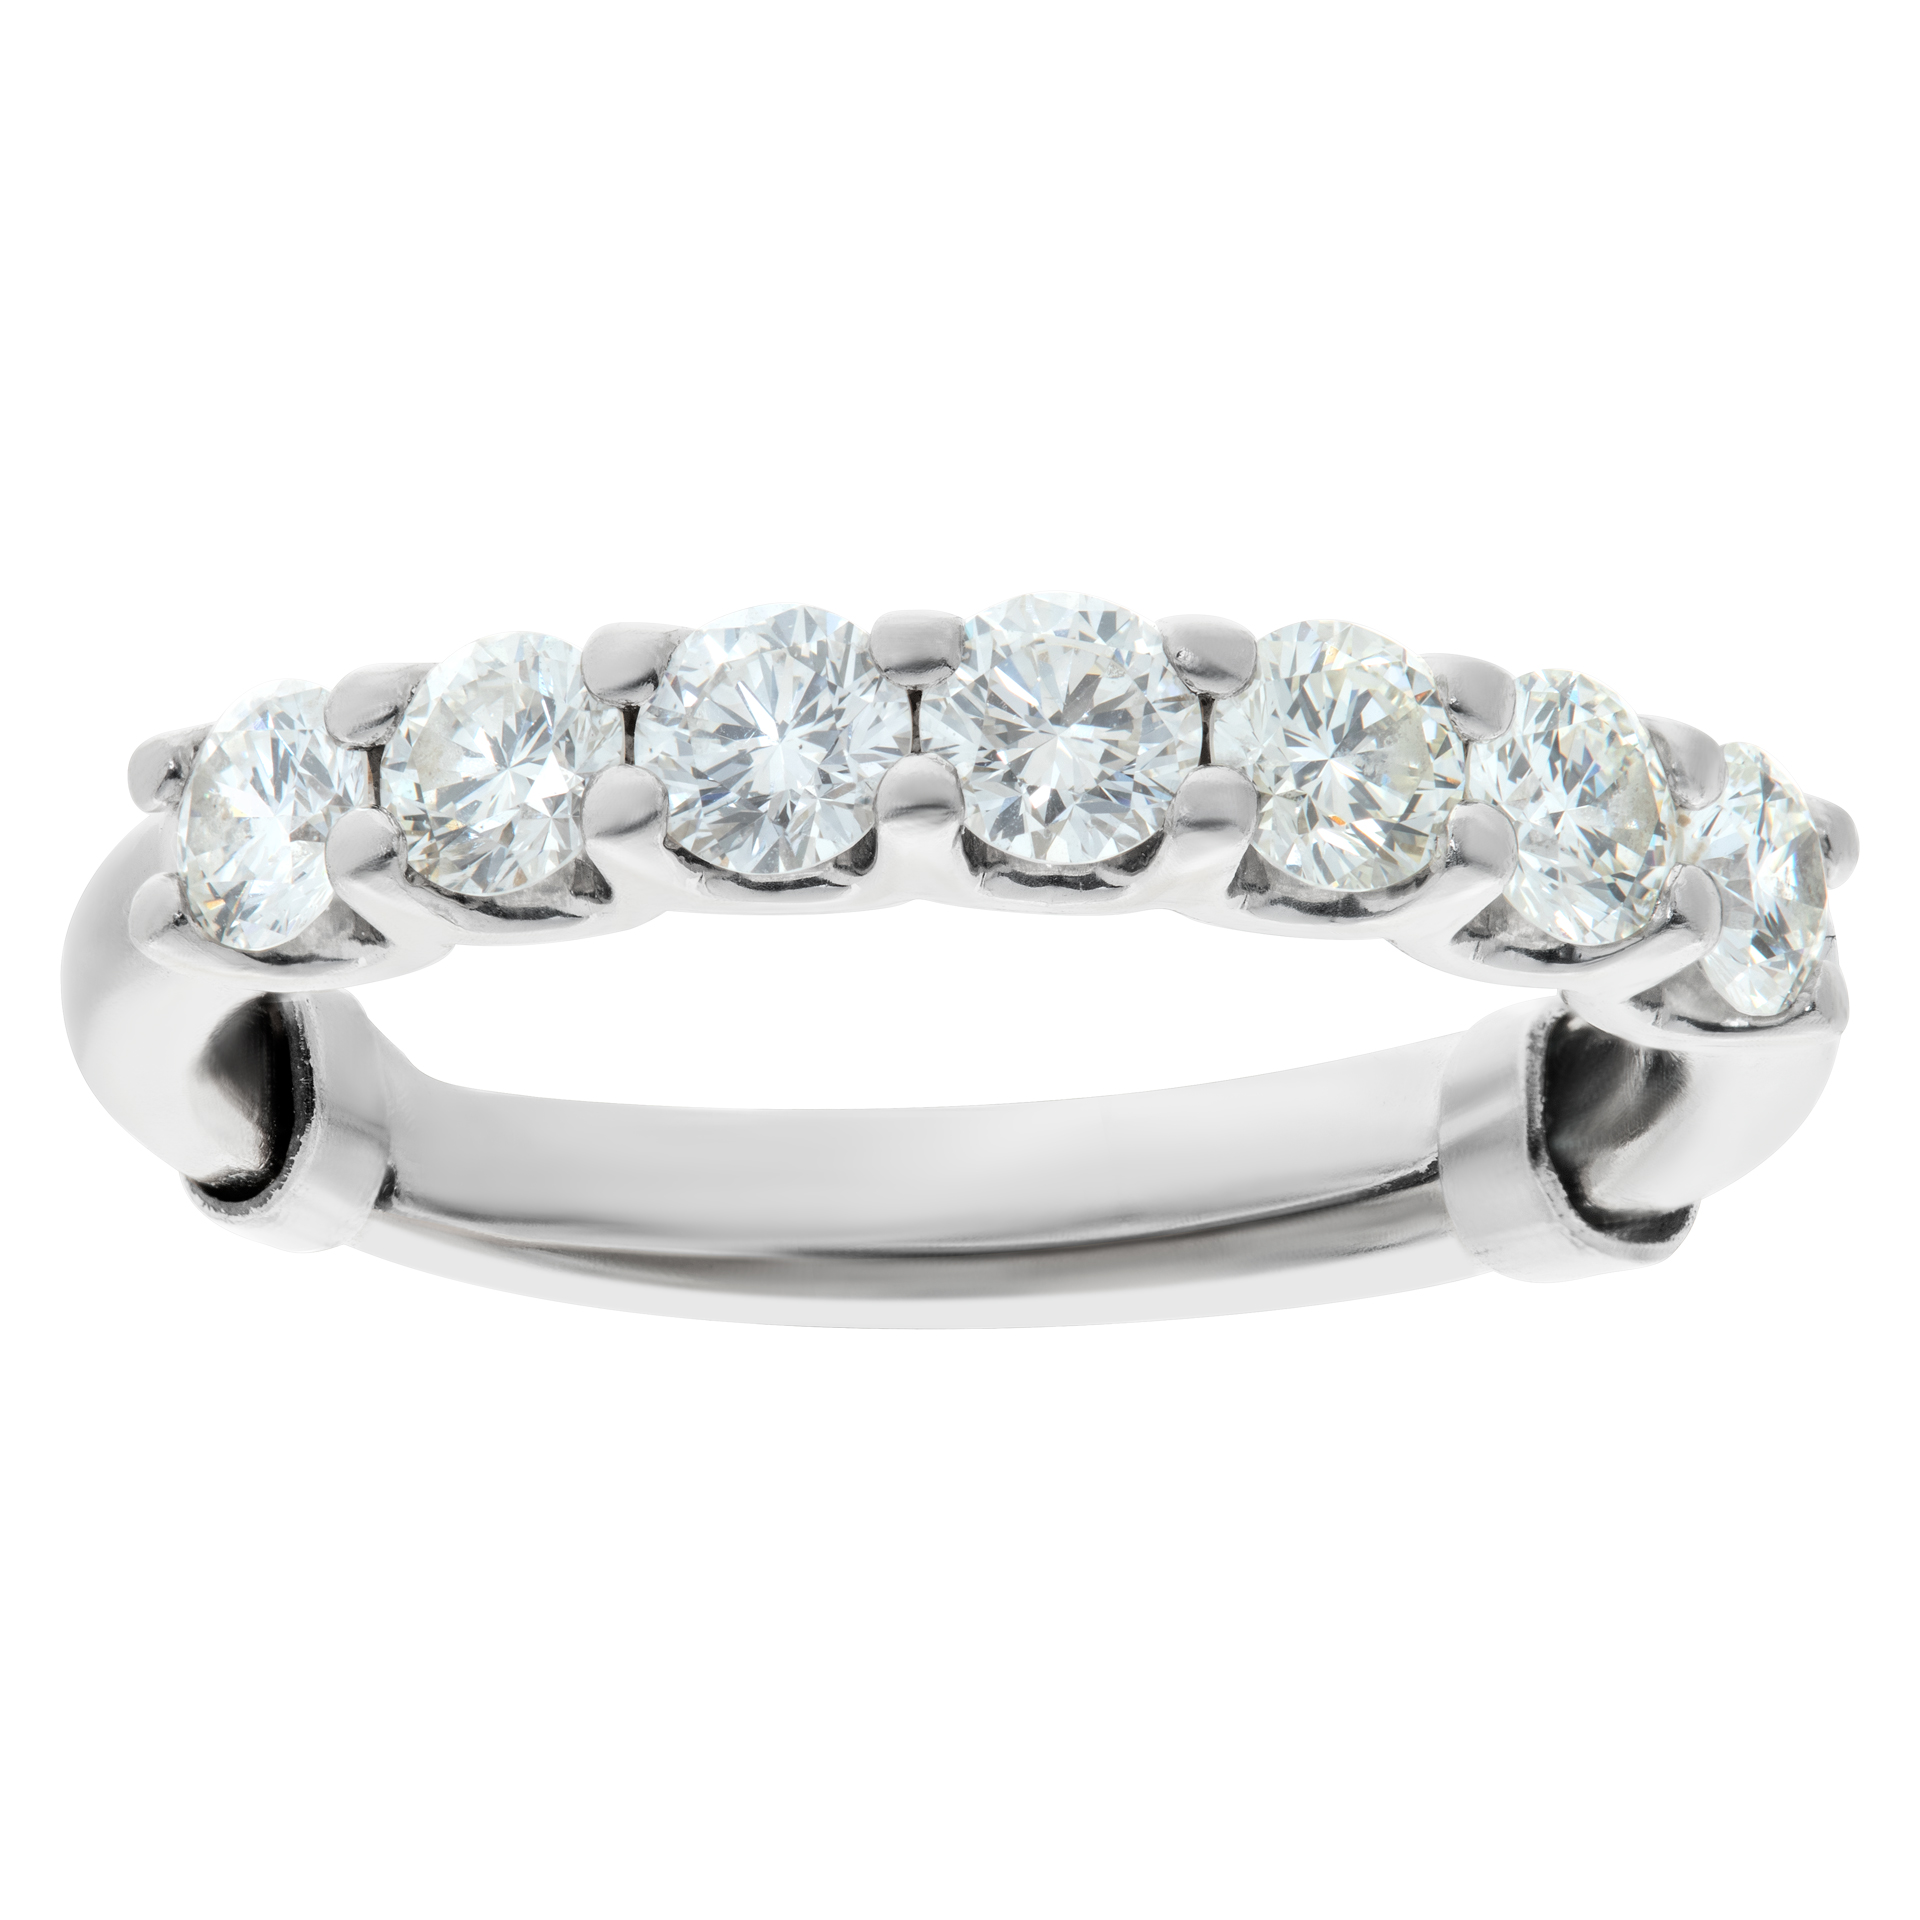 Platinum ring with 0.98 carats in diamonds